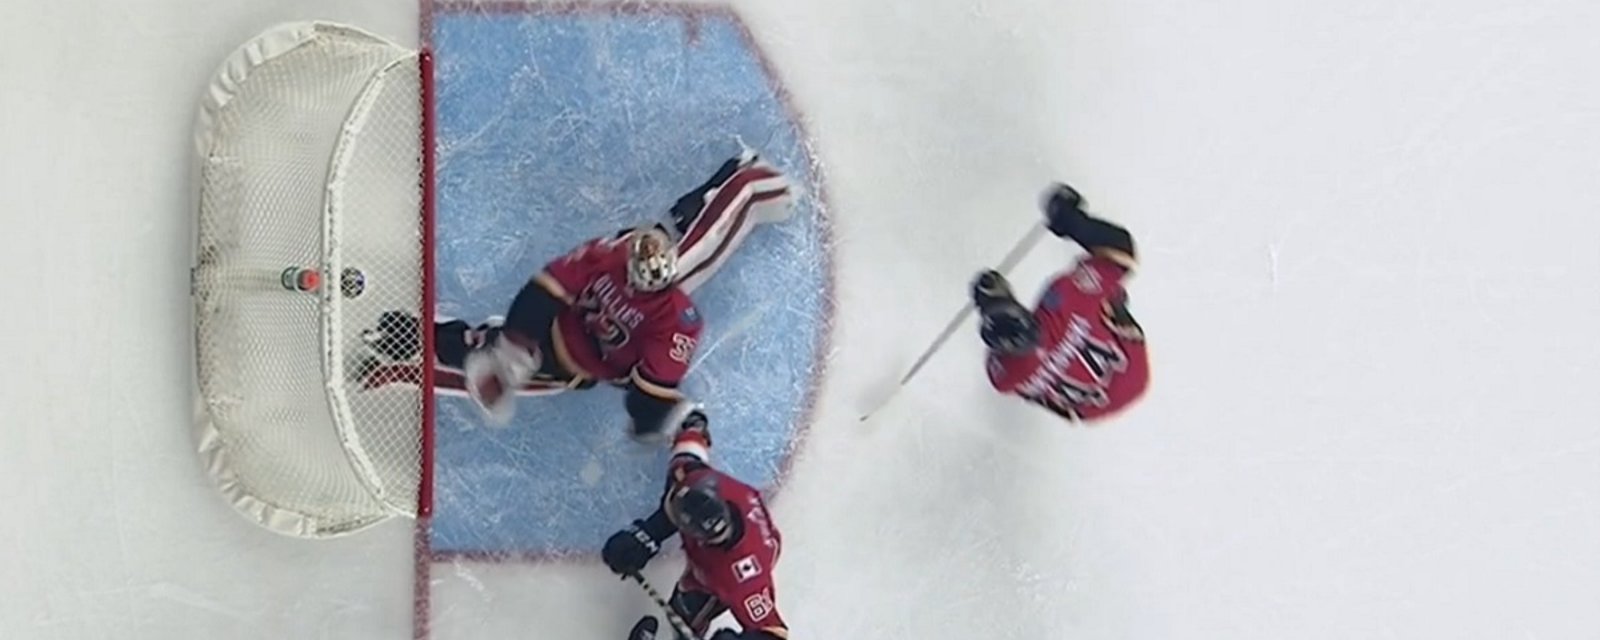 23-year-old goalie prospect may have just stolen the NHL's save of the year.